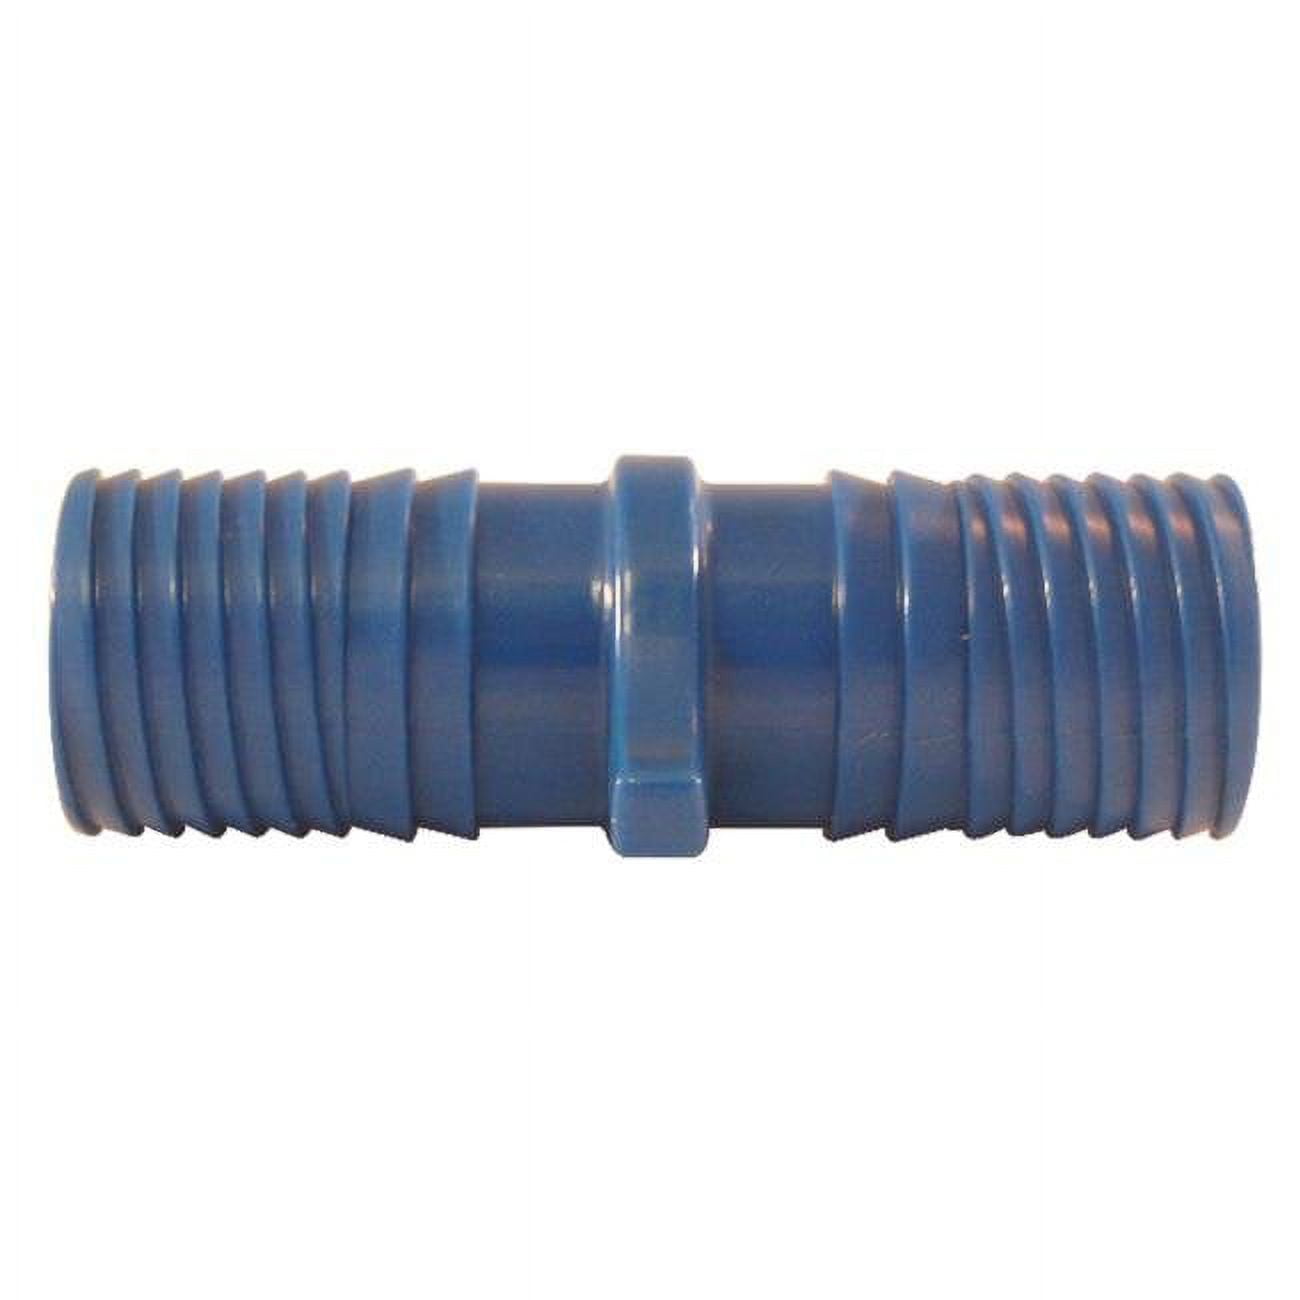 4814885 0.5 In. Insert X 0.5 In. Dia. Insert Polypropylene Coupling, Blue - Pack Of 5